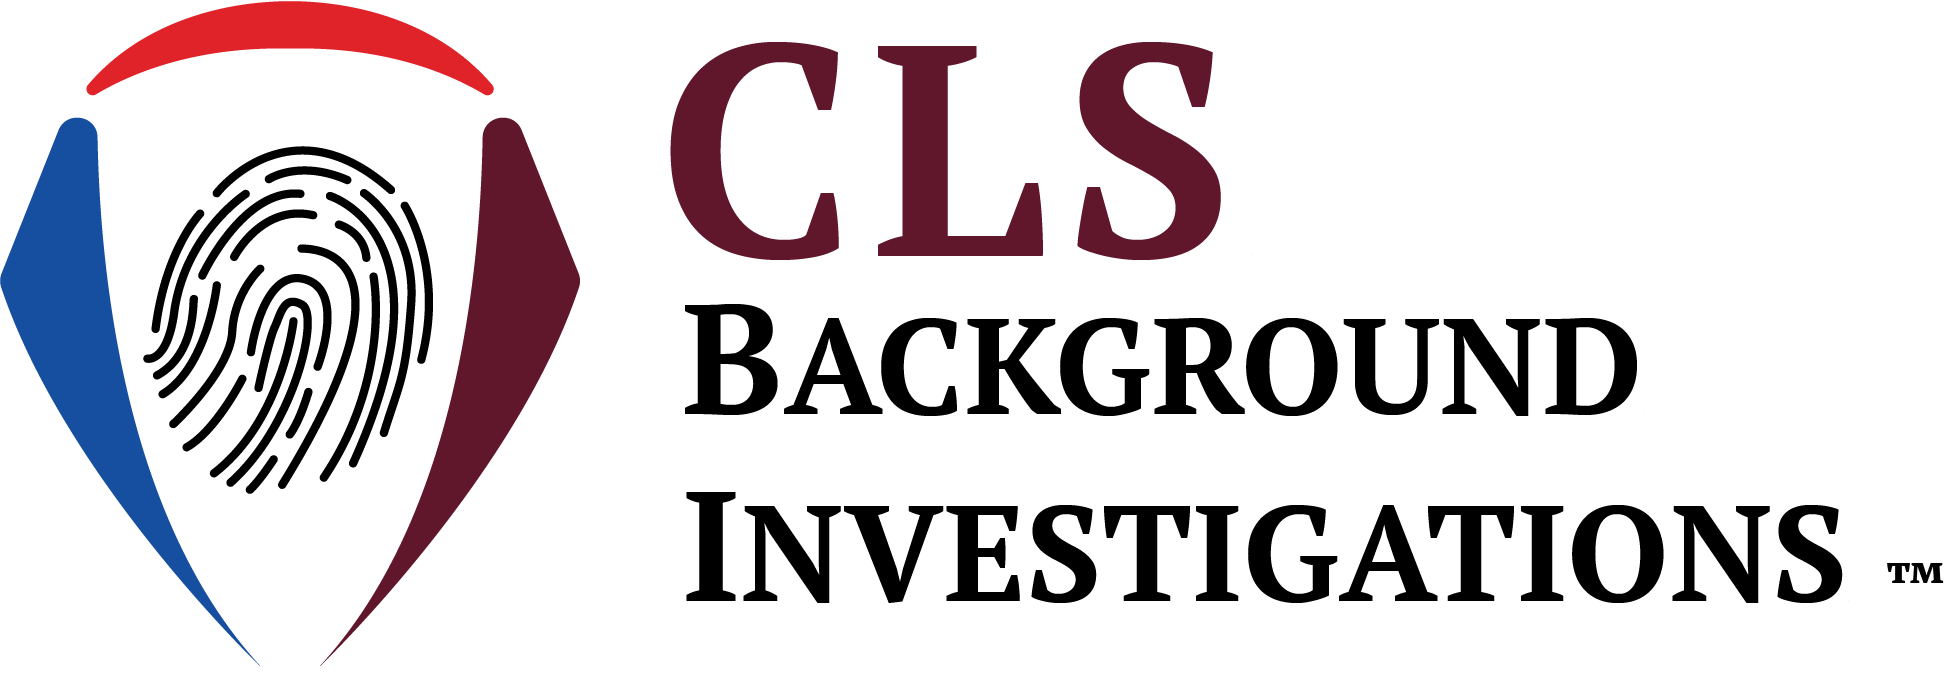 CLS Background Investigations